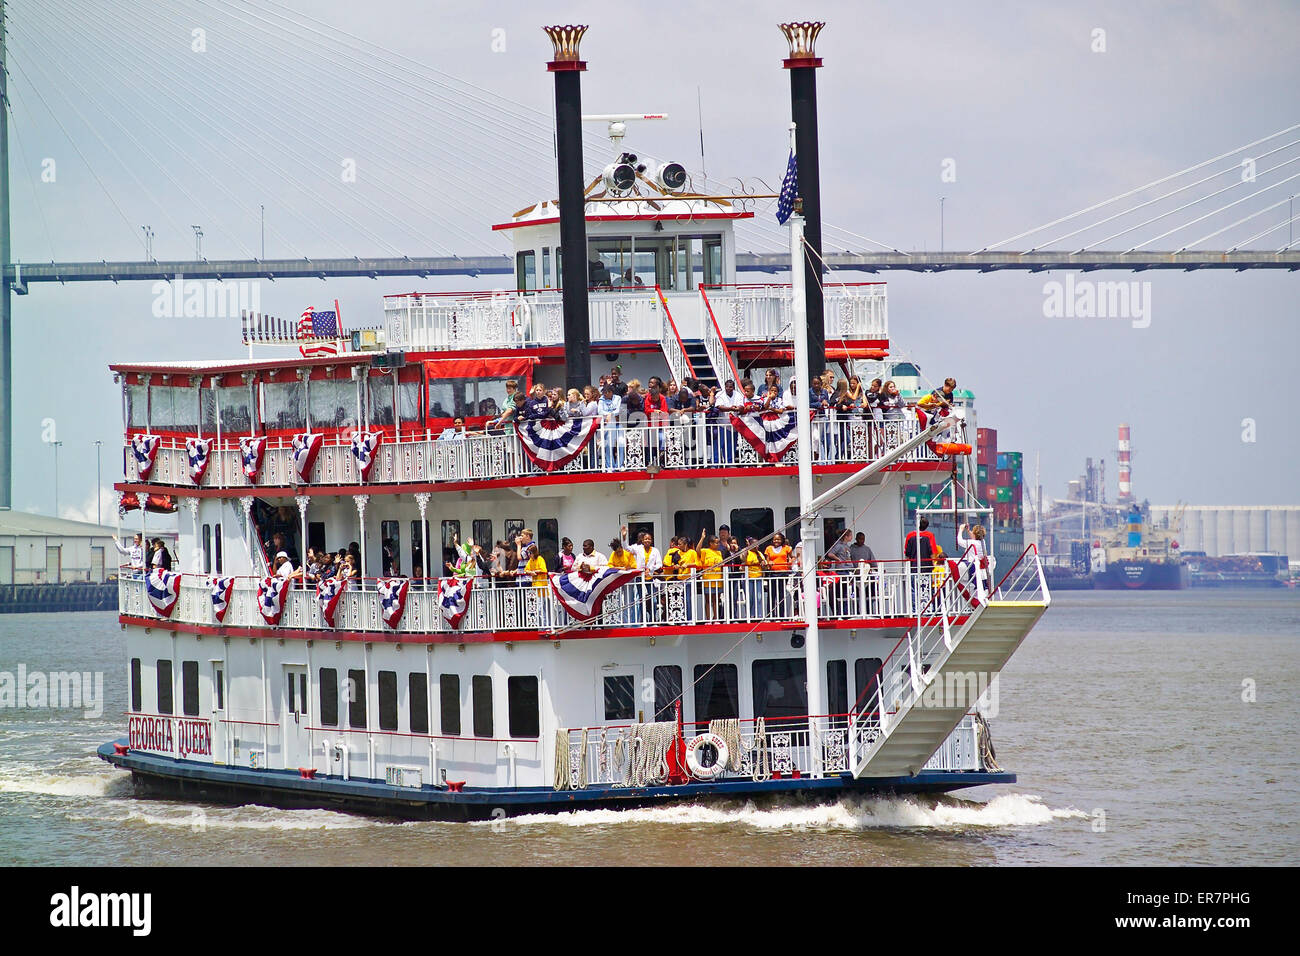 Schoolchildren get a local history lesson aboard an old-time riverboat that is exploring the Savannah River in Georgia, USA. Stock Photo